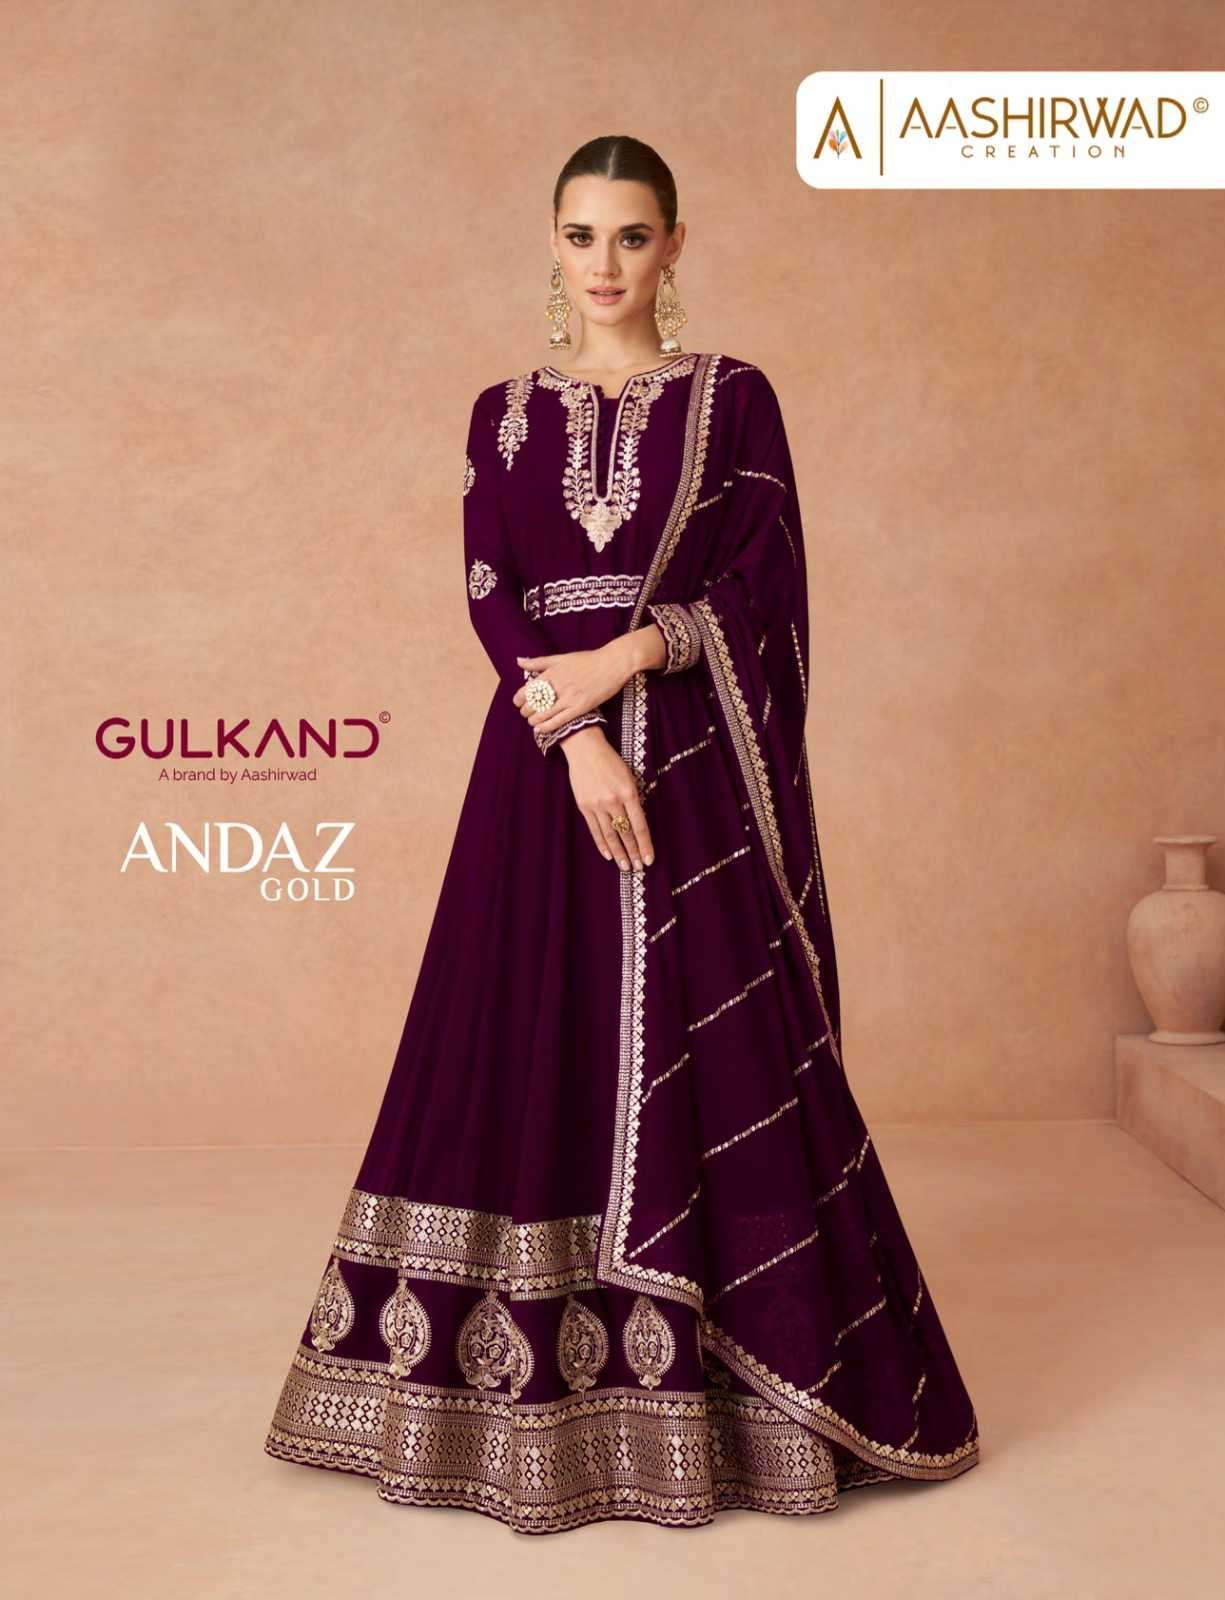 AASHIRWAD PRESENTS GULKAND ANDAZ GOLD EXCLUSIVE DESIGNER LONG GOWN WITH DUPATTA FESTIVE WEAR CATALOG WHOLESALER AND EXPORTER IN SURAT 